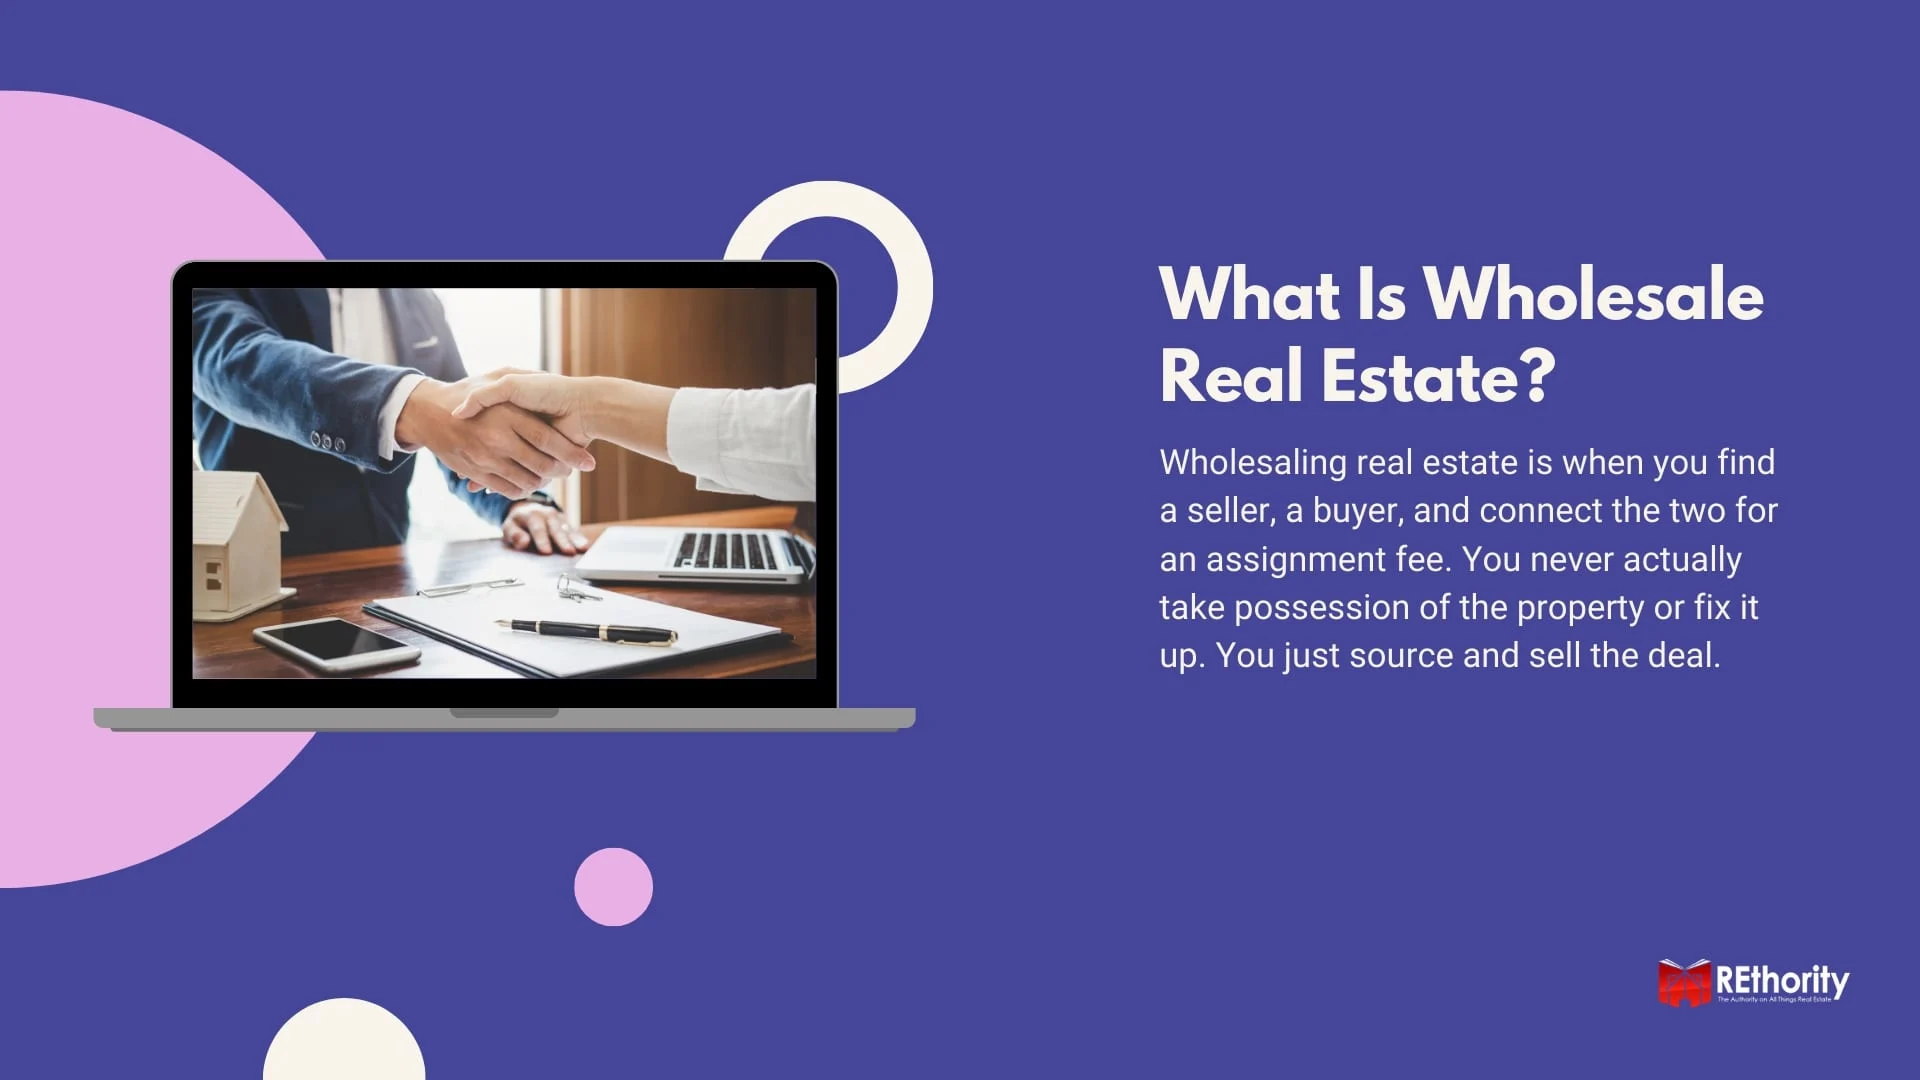 What is Wholesale Real Estate?